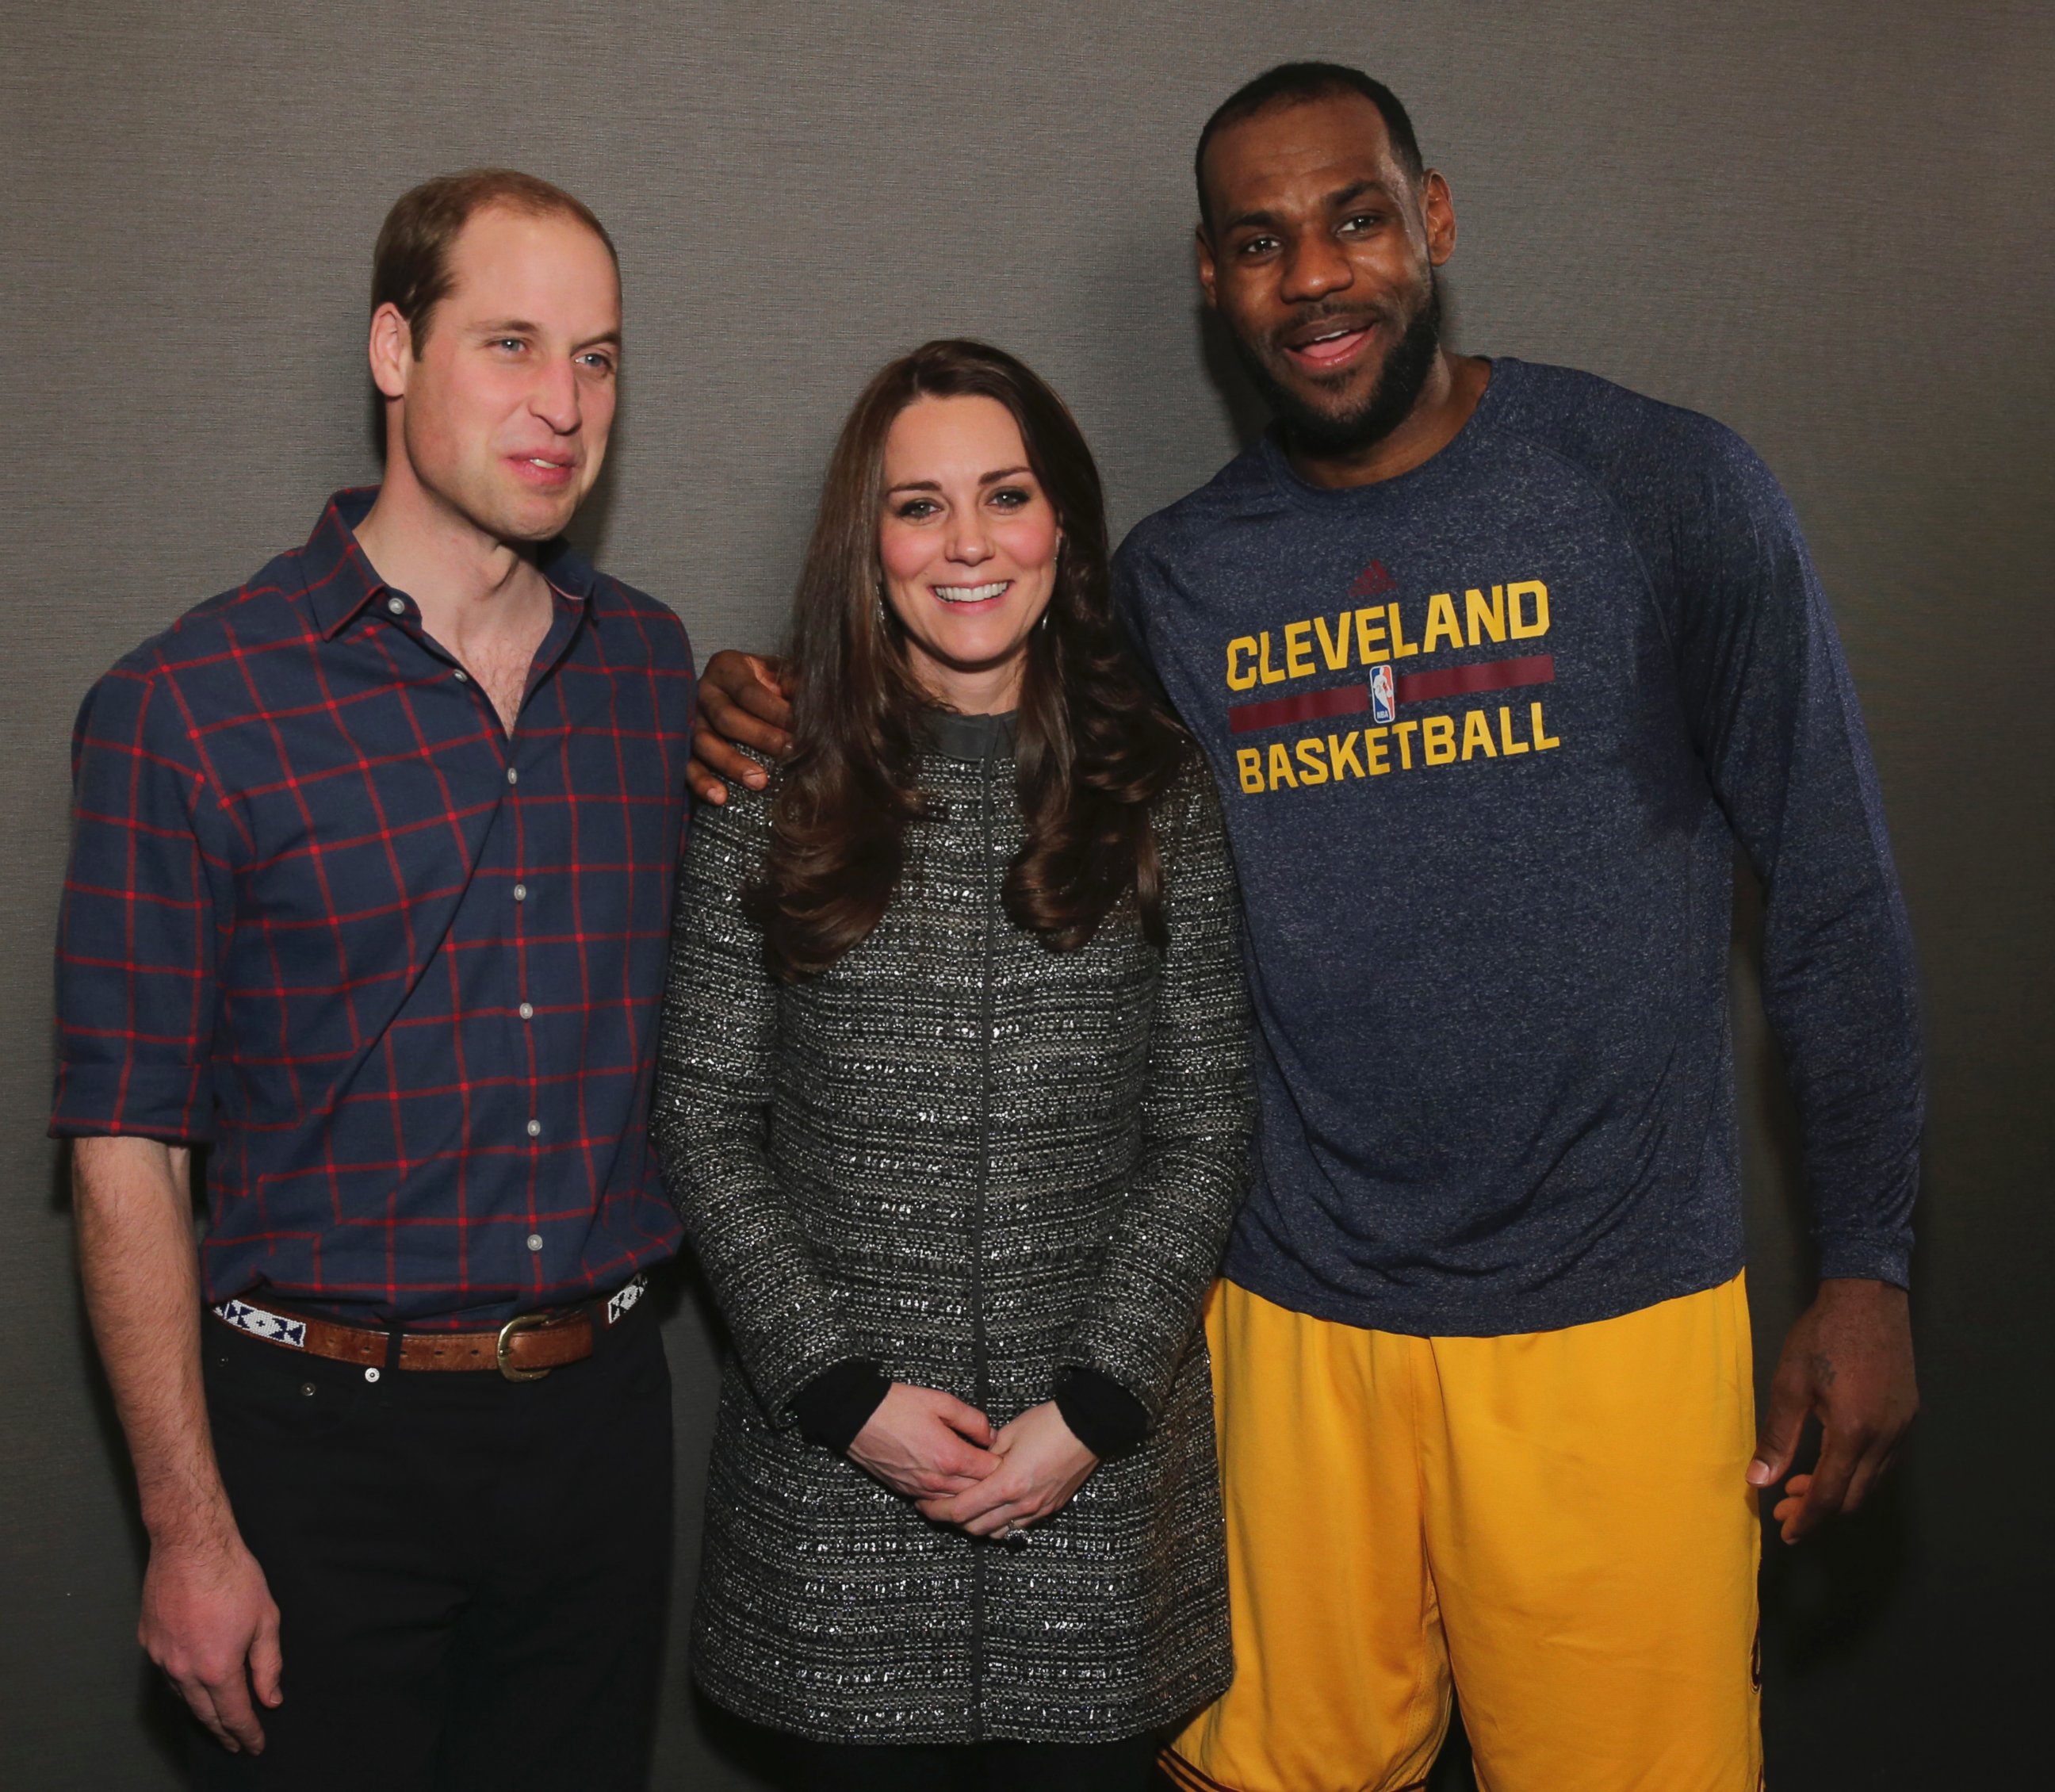 Britain's Prince William, left, and Kate, Duchess of Cambridge pose with Cleveland Cavaliers' LeBron James, right, backstage of an NBA basketball game between the Cavaliers and the Brooklyn Nets on Monday, Dec. 8, 2014, in New York.